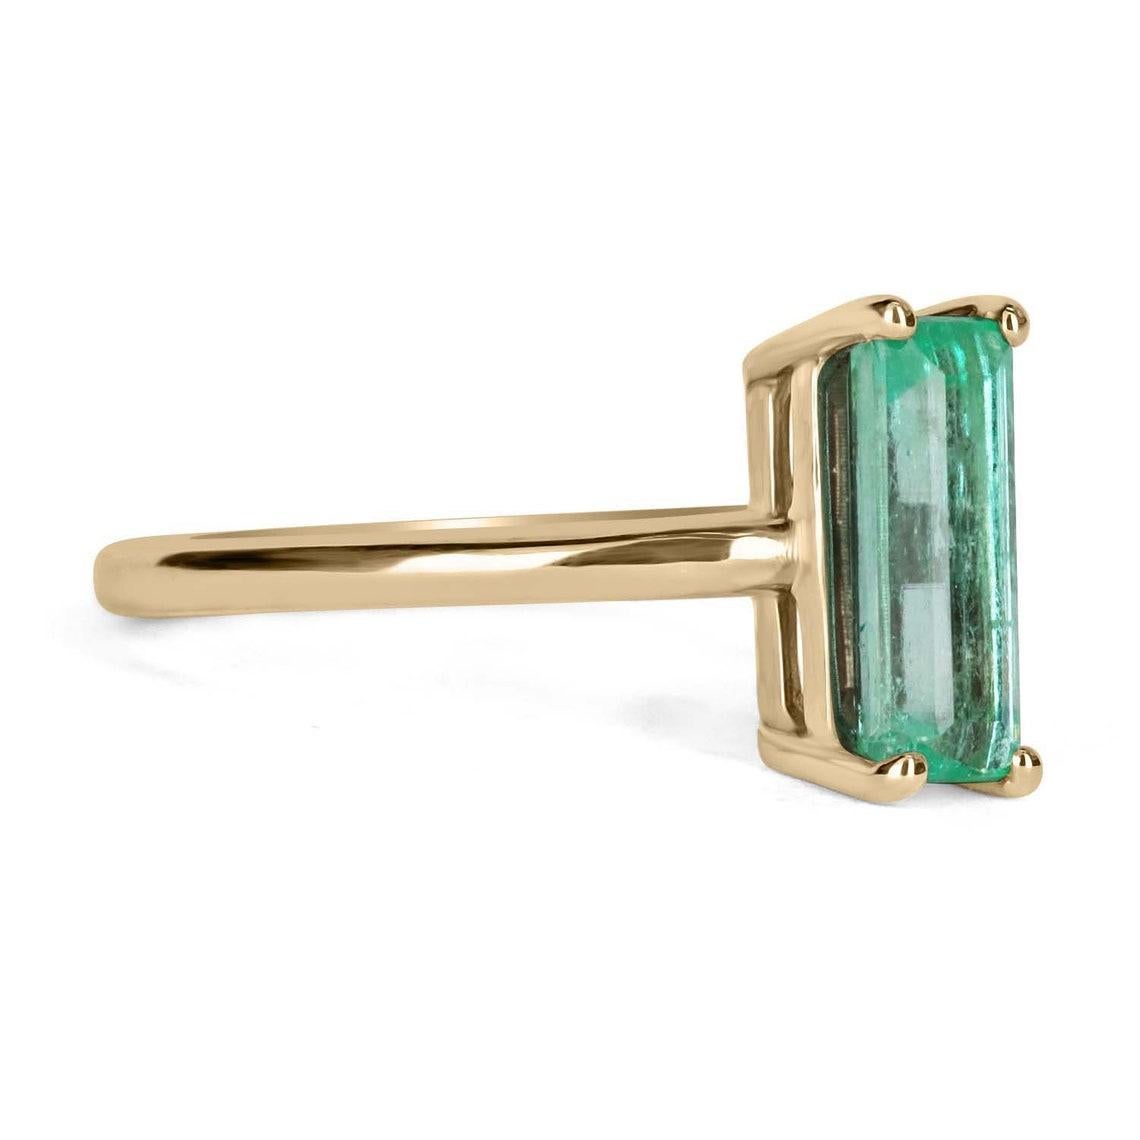 Displayed is a classic RARE Colombian emerald solitaire emerald-cut engagement or right-hand ring in 14K yellow gold. This gorgeous solitaire ring carries a full 1.90-carat emerald in a four-prong setting and the shape is ONE OF A KIND. Fully